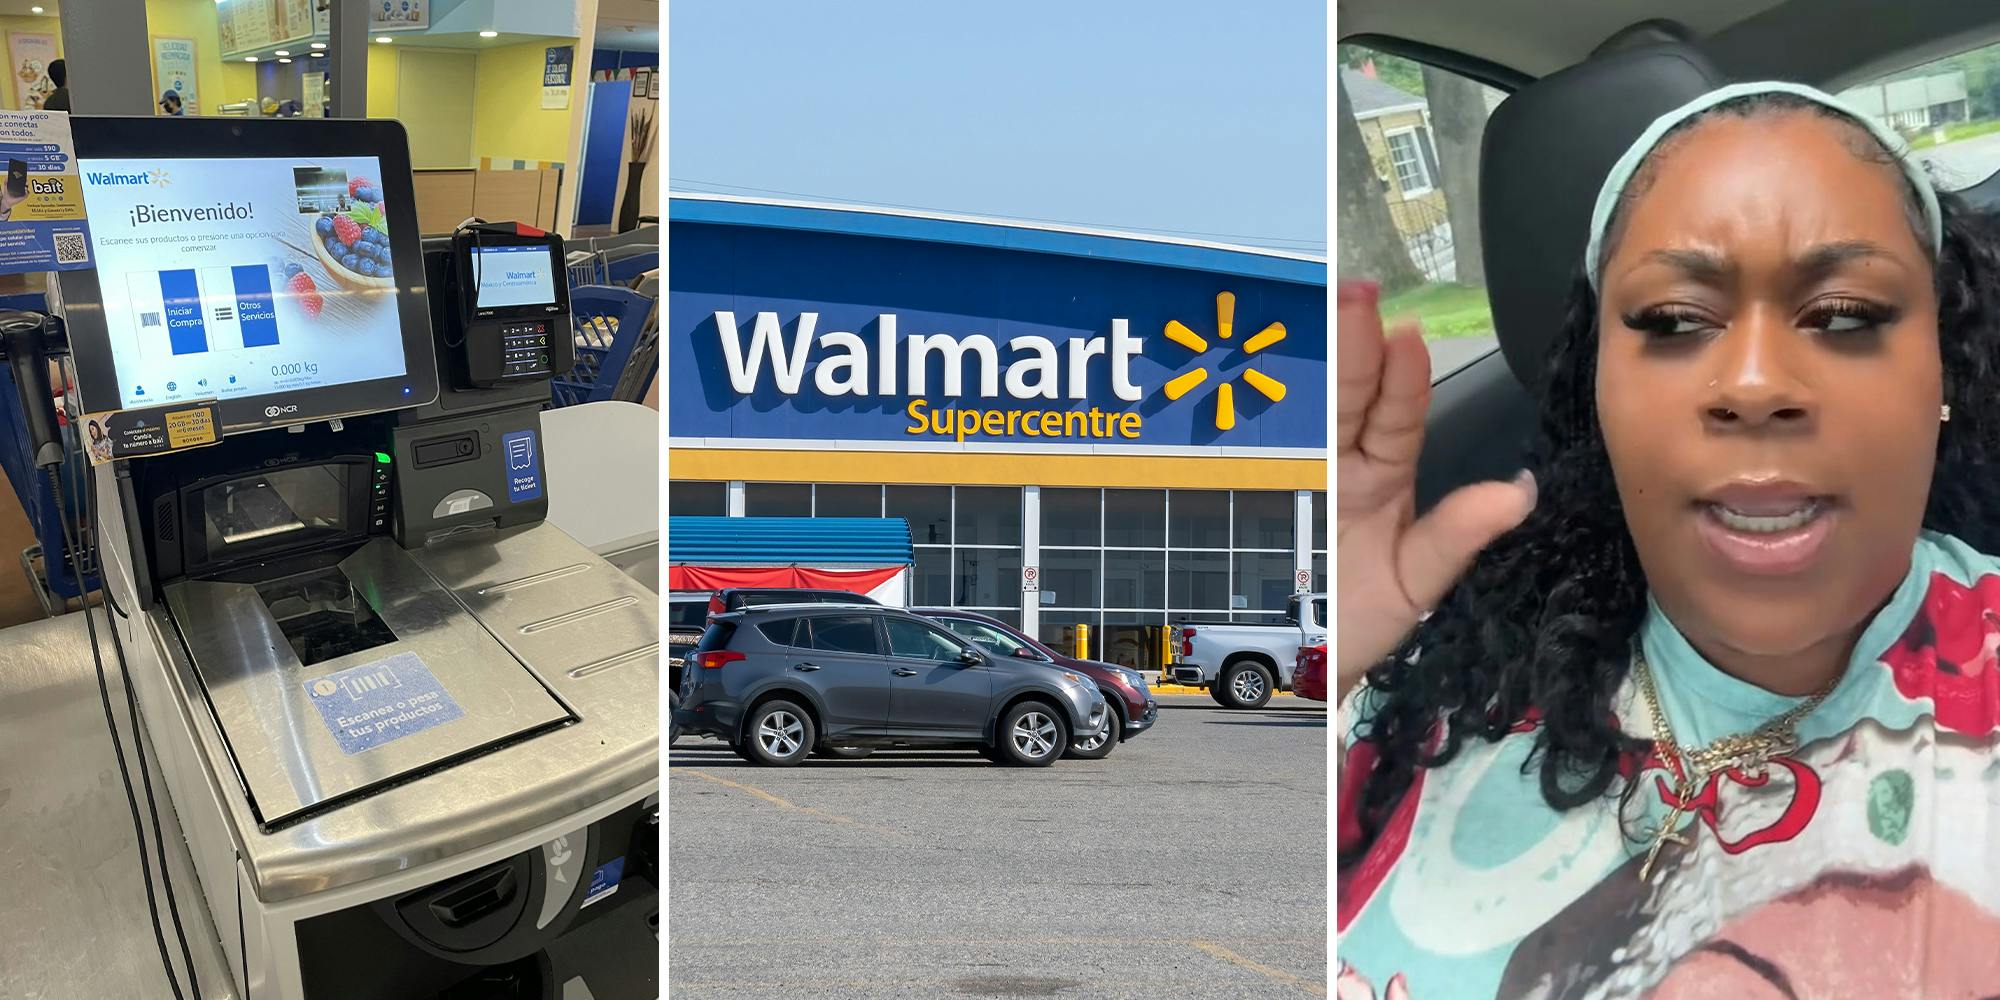 ‘I would have returned EVERYTHING!!!’: Walmart shopper says worker remotely shut down self-checkout machine after suspecting her of stealing